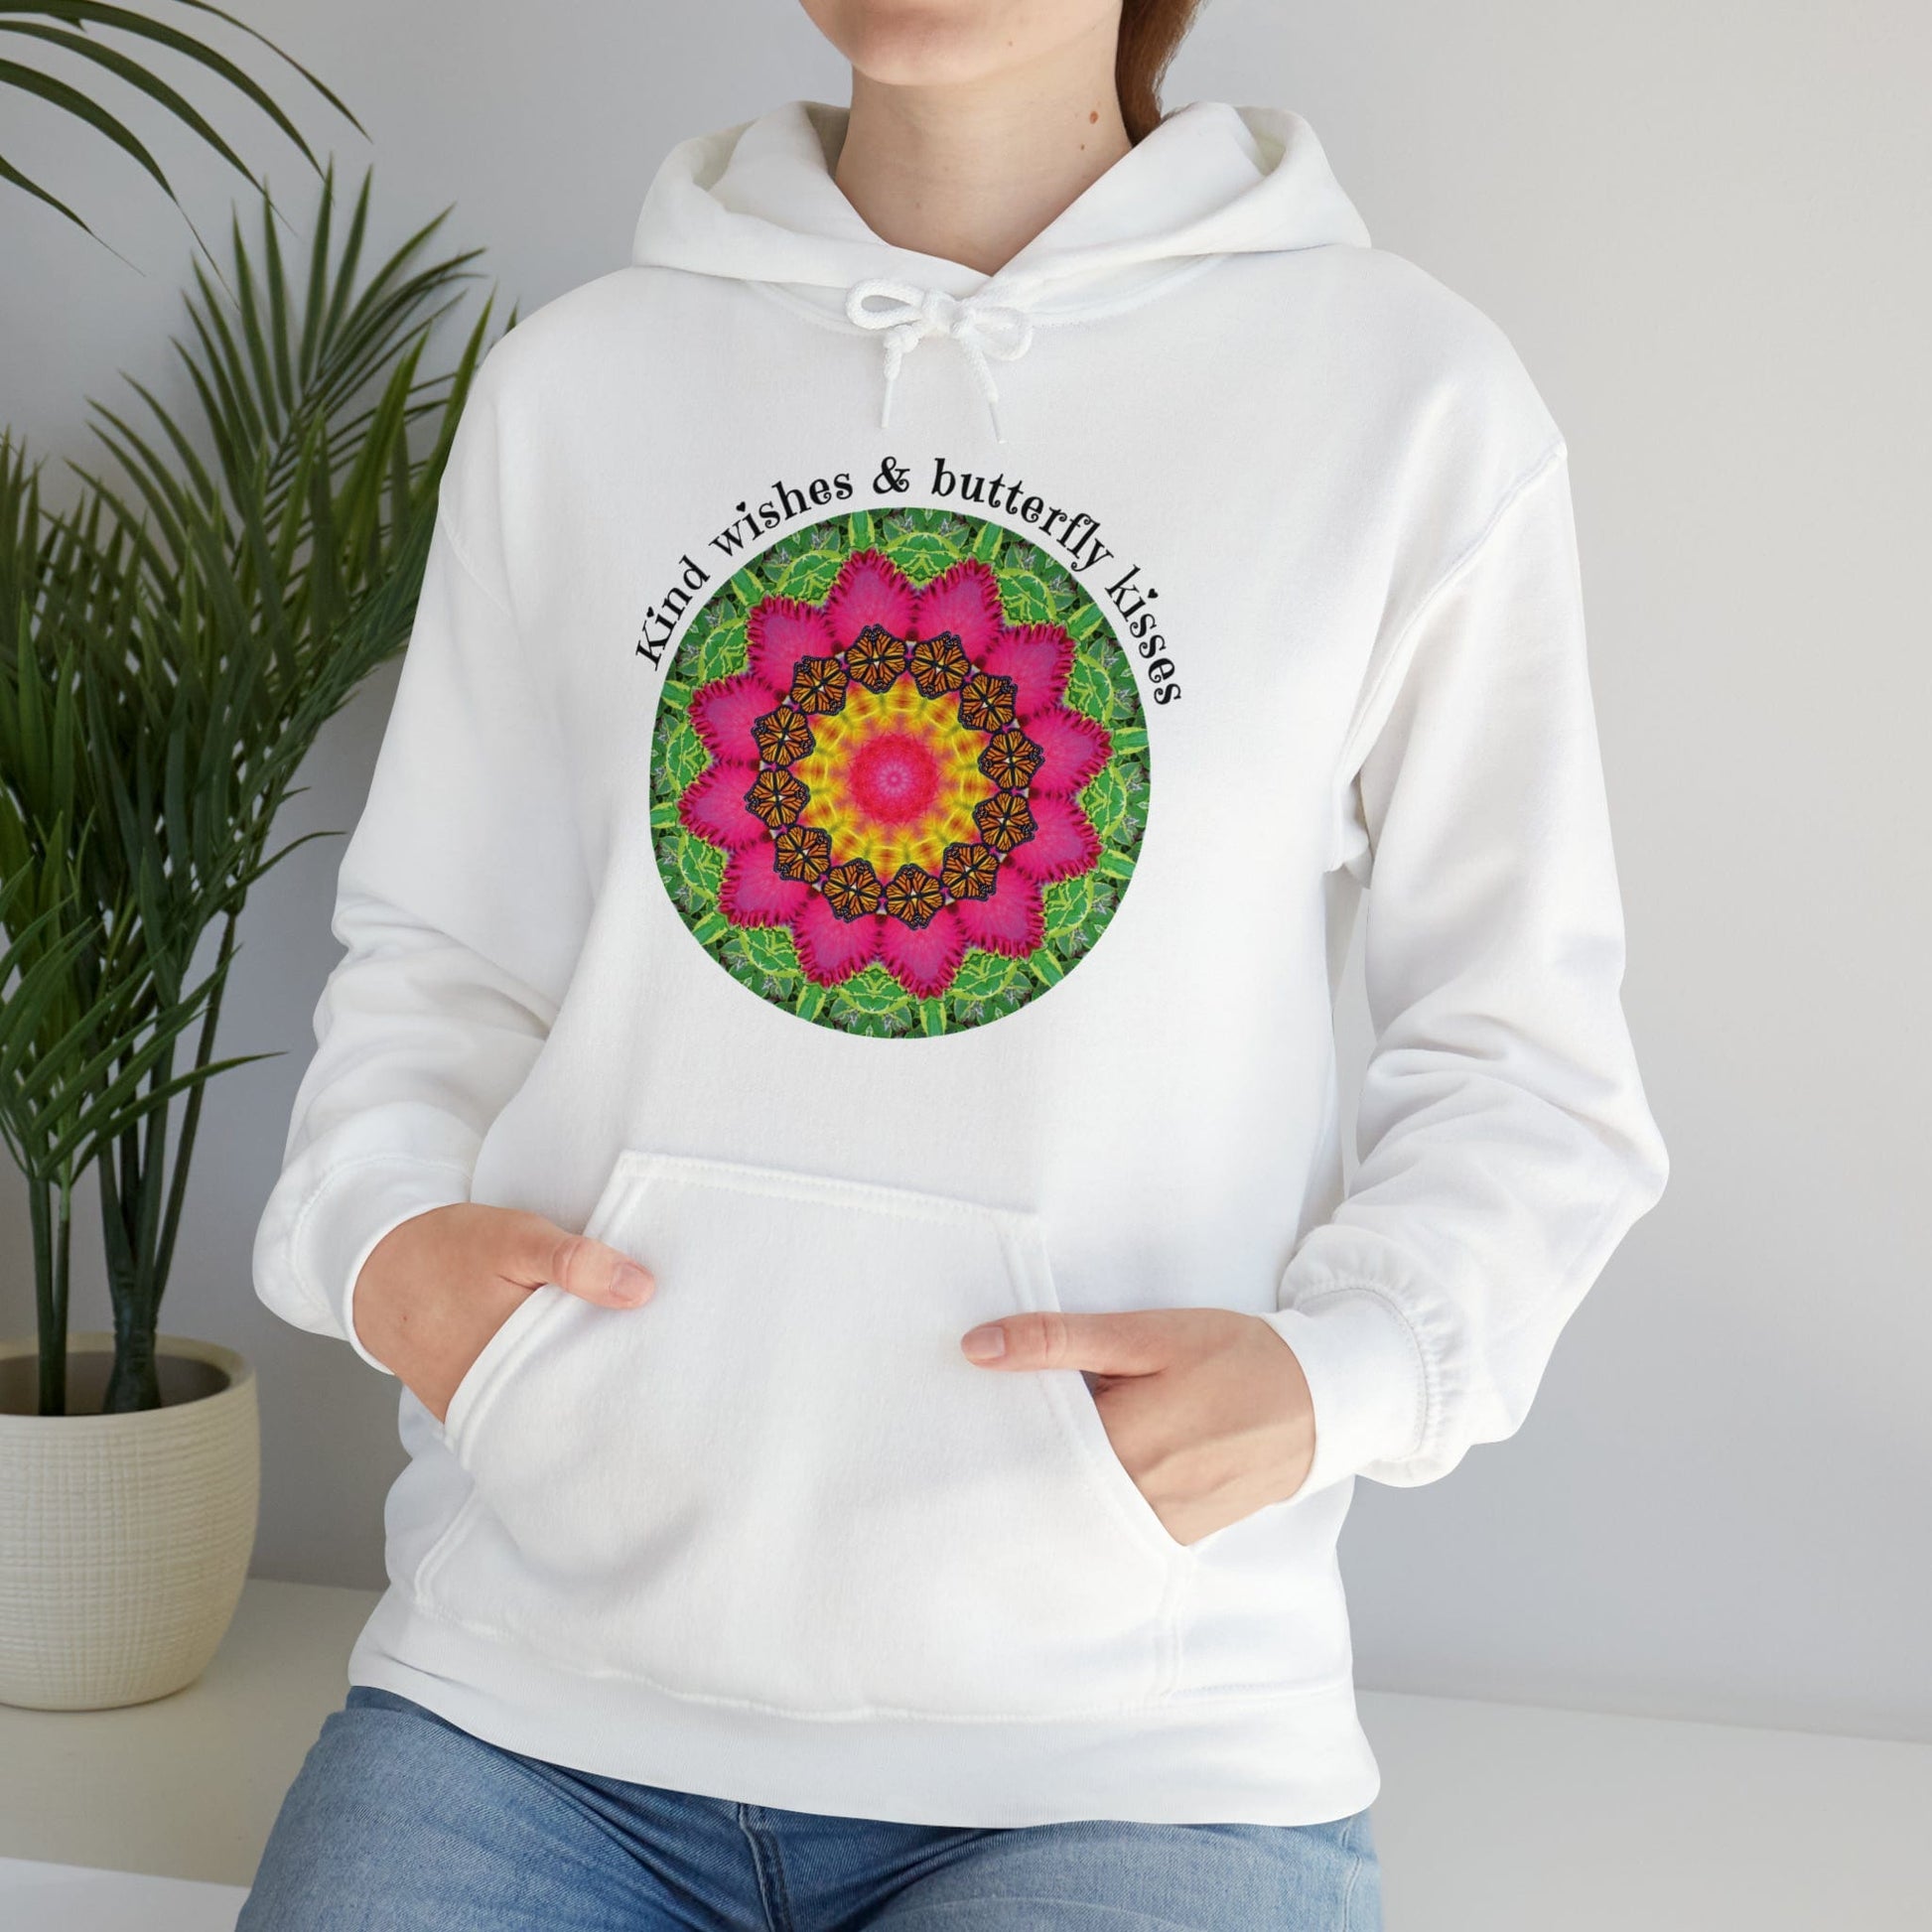 Pretty & Cute Butterfly Kindness Graphic Hoodie Sweatshirt Monarch Butterfly Mandala Art Kind wishes & butterfly kisses white